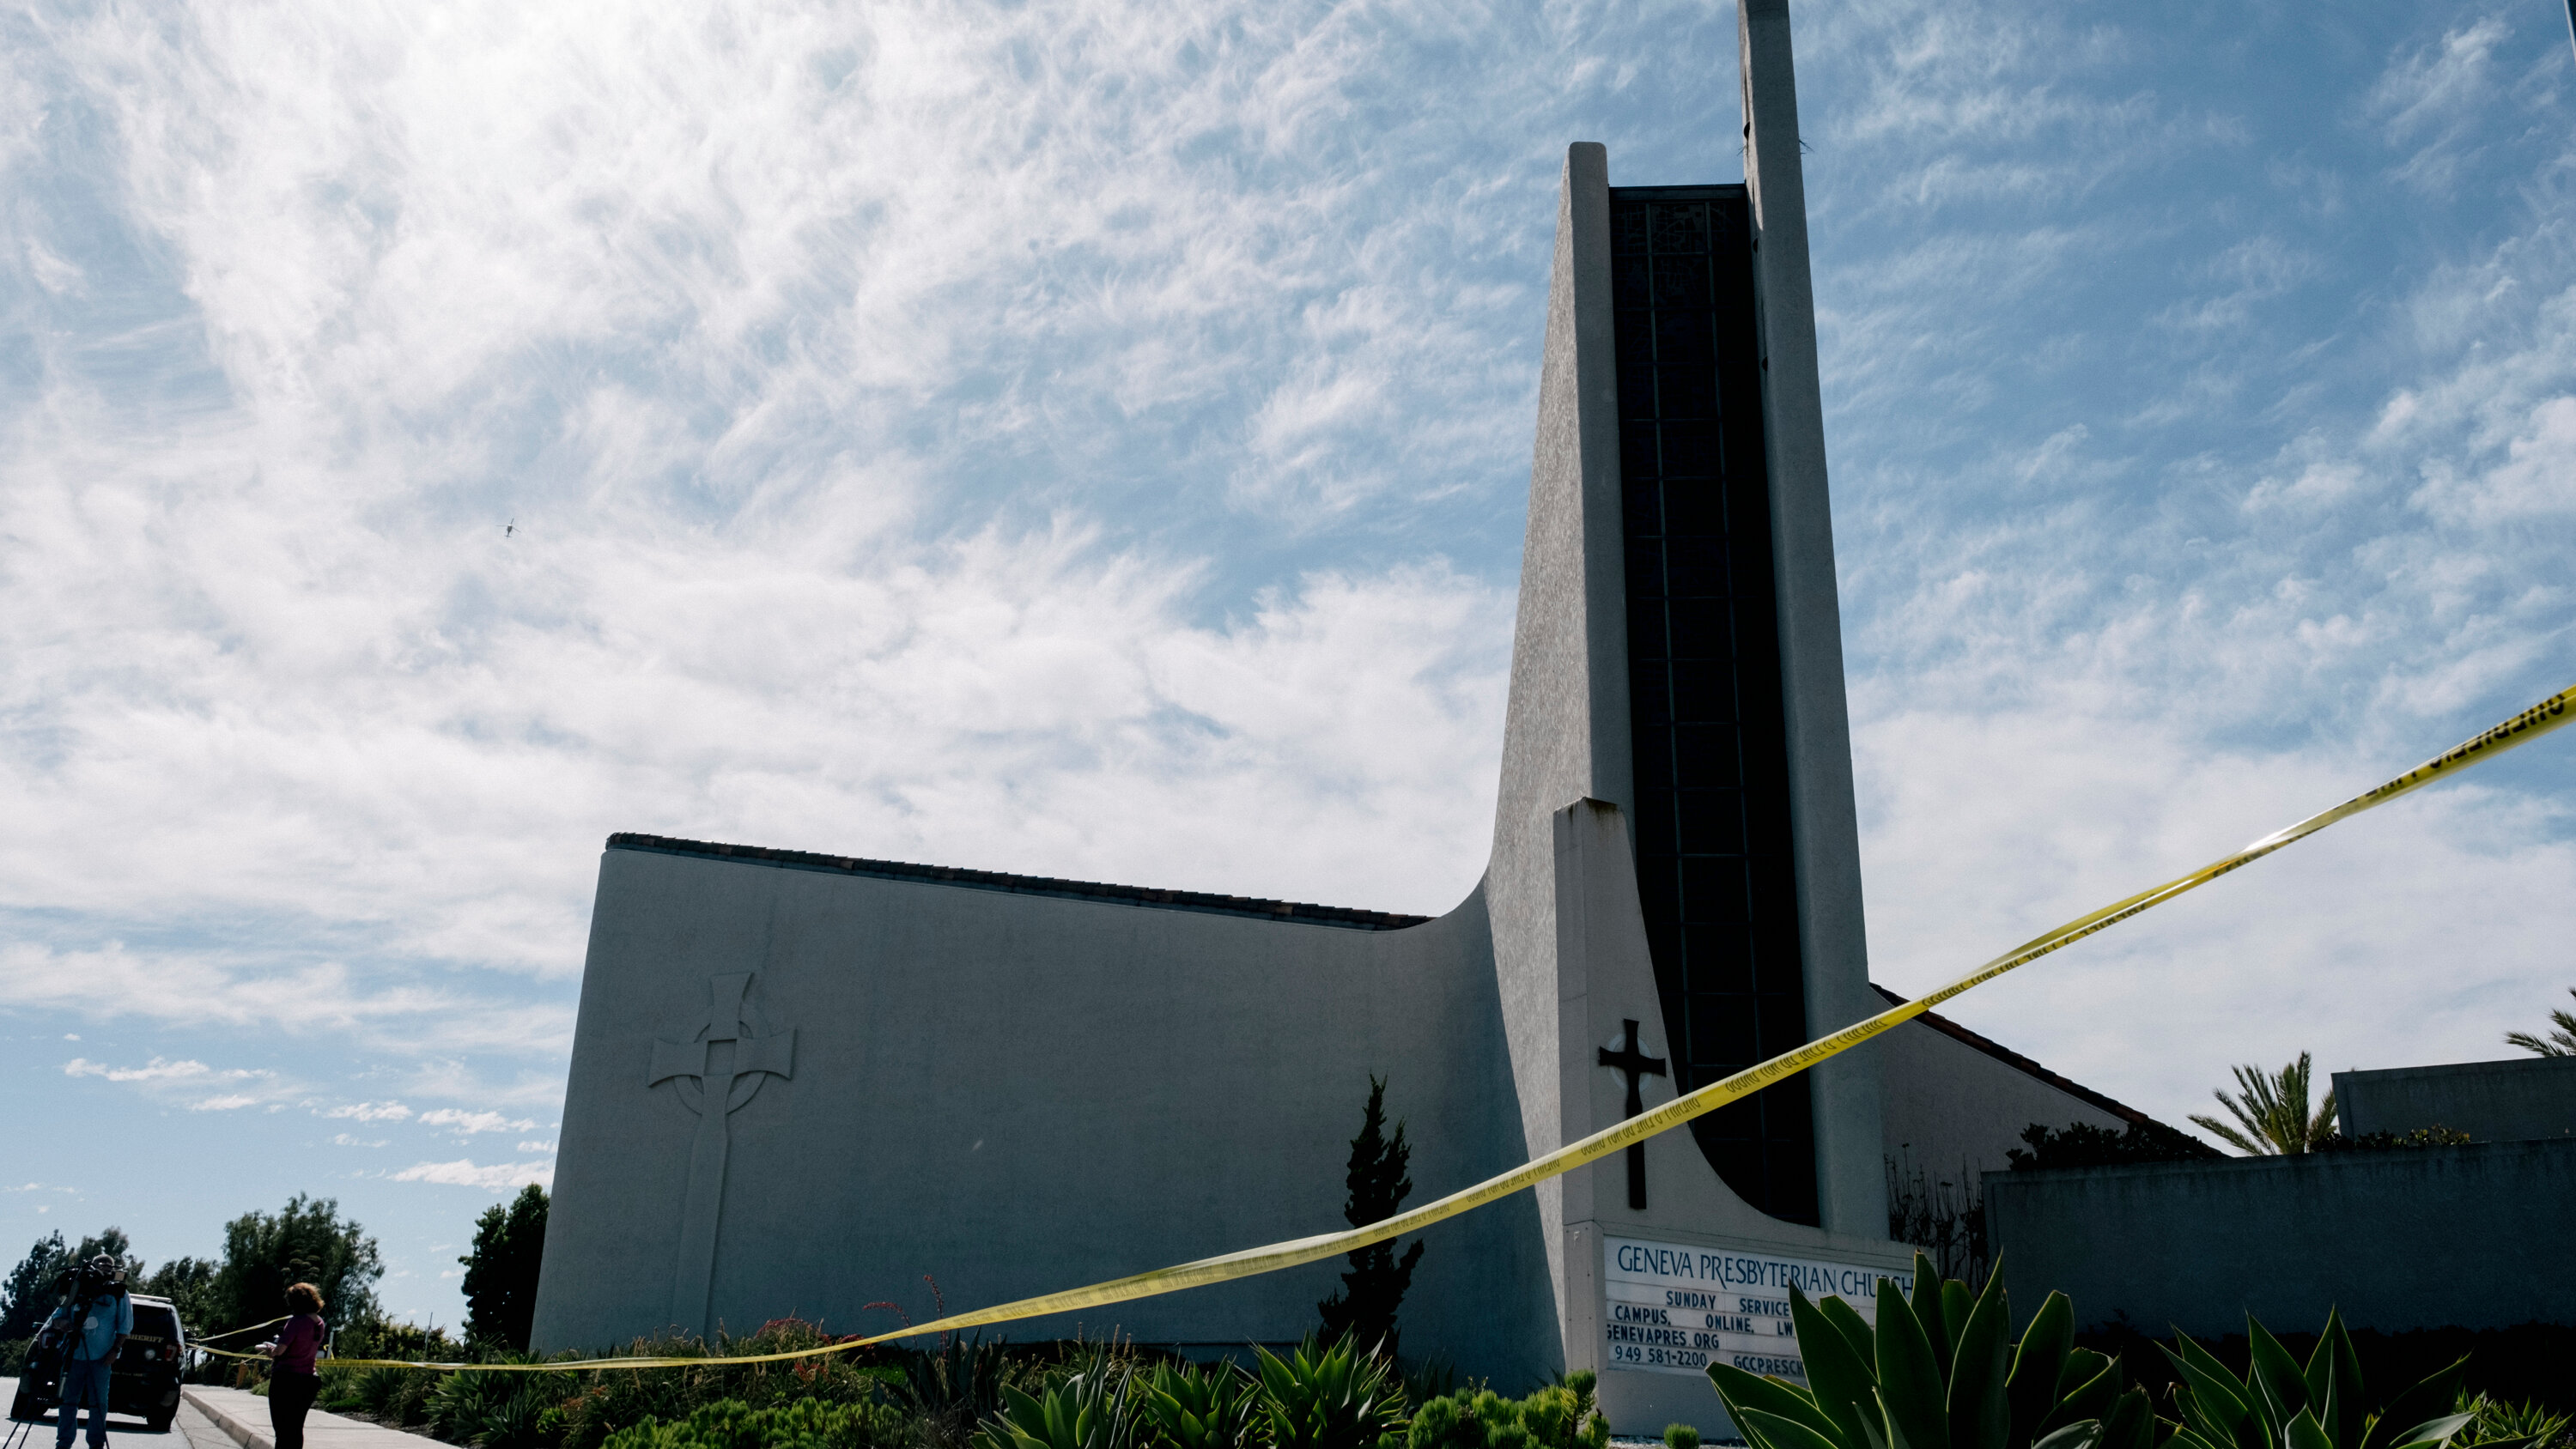 One person killed in California church shooting in US